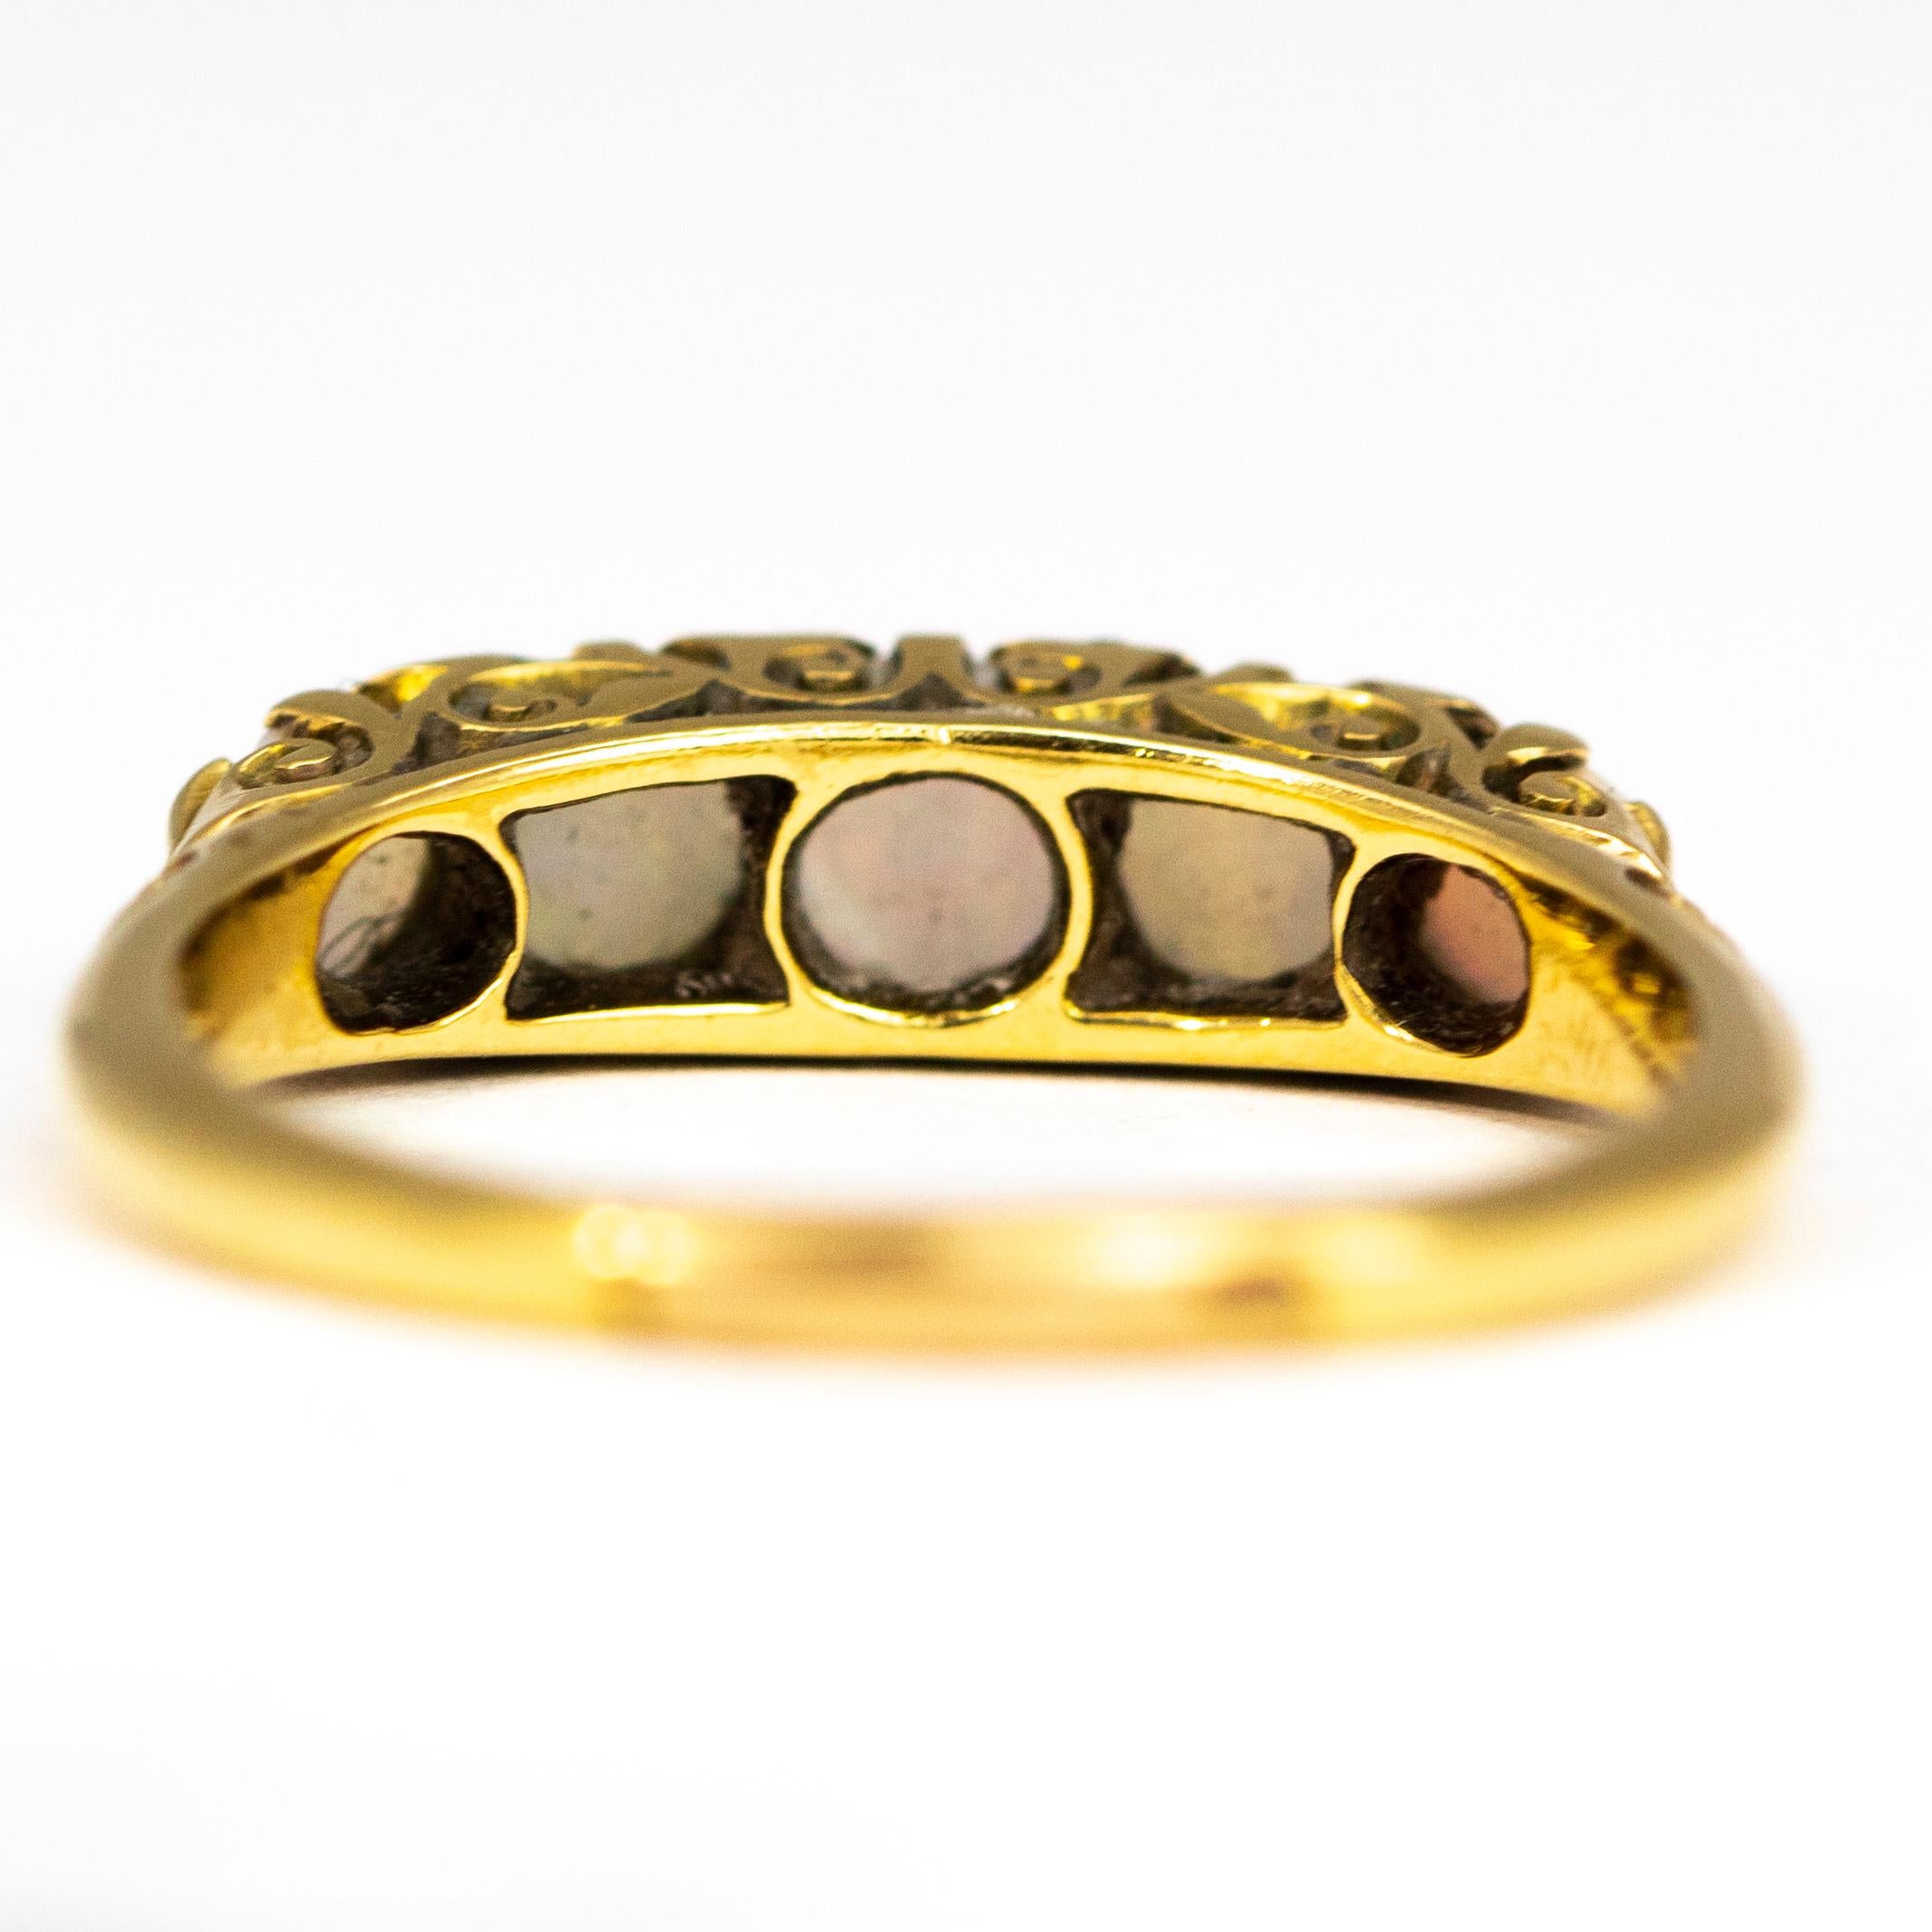 Edwardian Antique Opal and Diamond 18 Carat Gold Five-Stone Ring